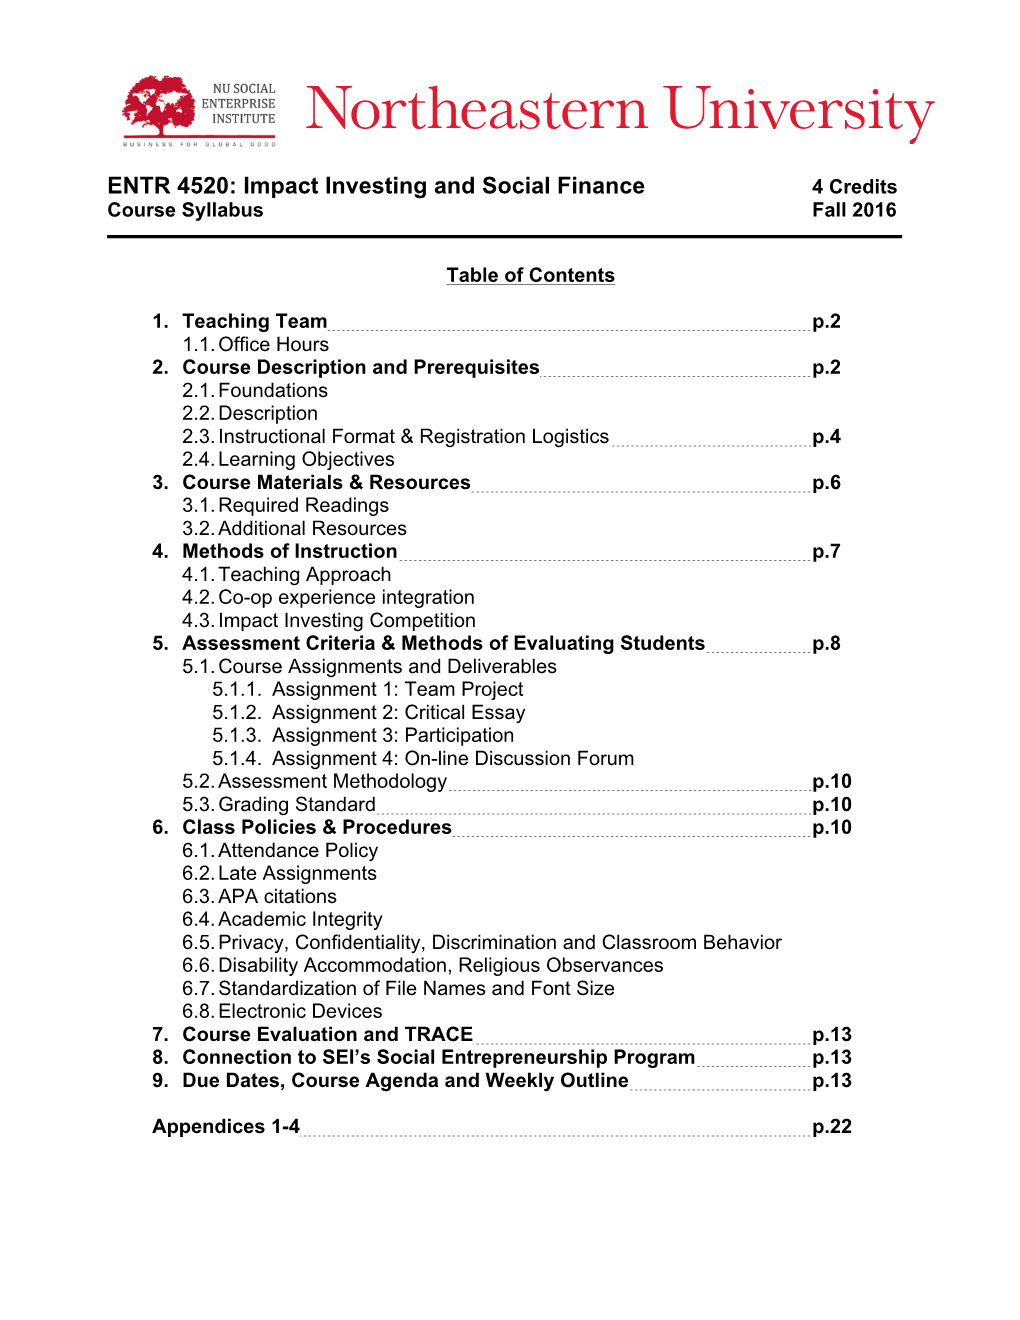 Impact Investing and Social Finance 4 Credits Course Syllabus Fall 2016